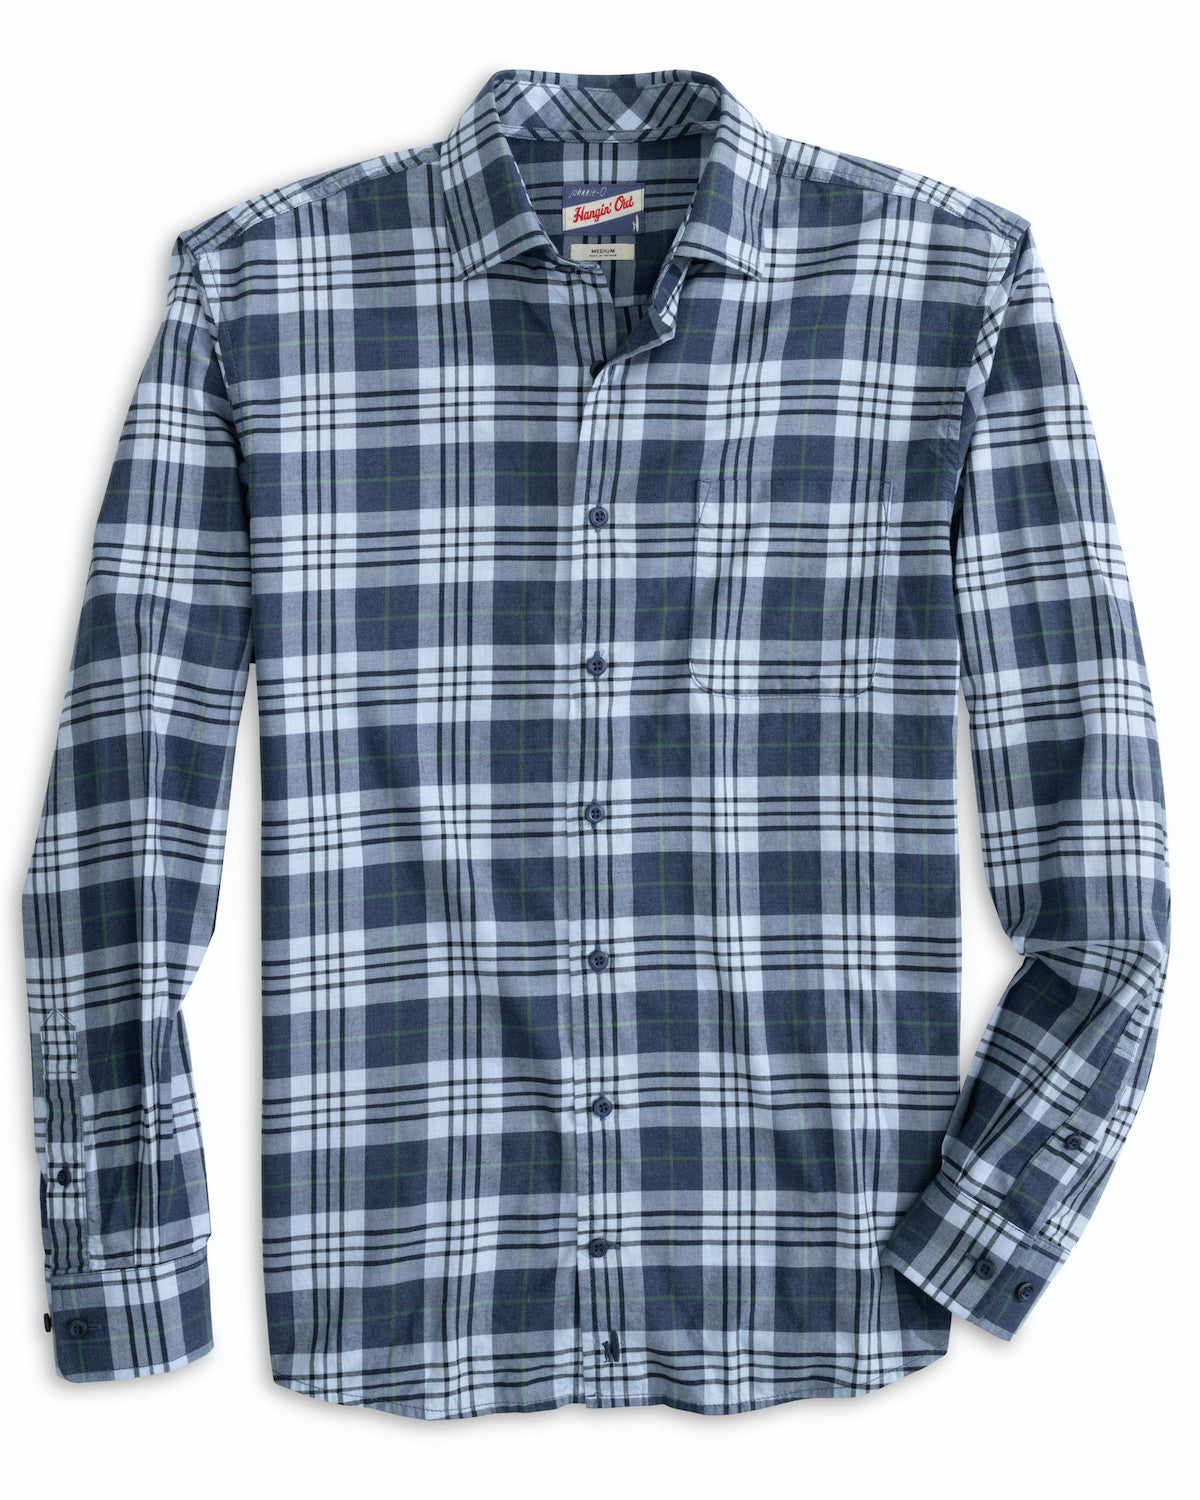 Johnnie-O Men's Tomkins Hangin' Out Button Up Shirt Apparel Johnnie-O Wake Small 